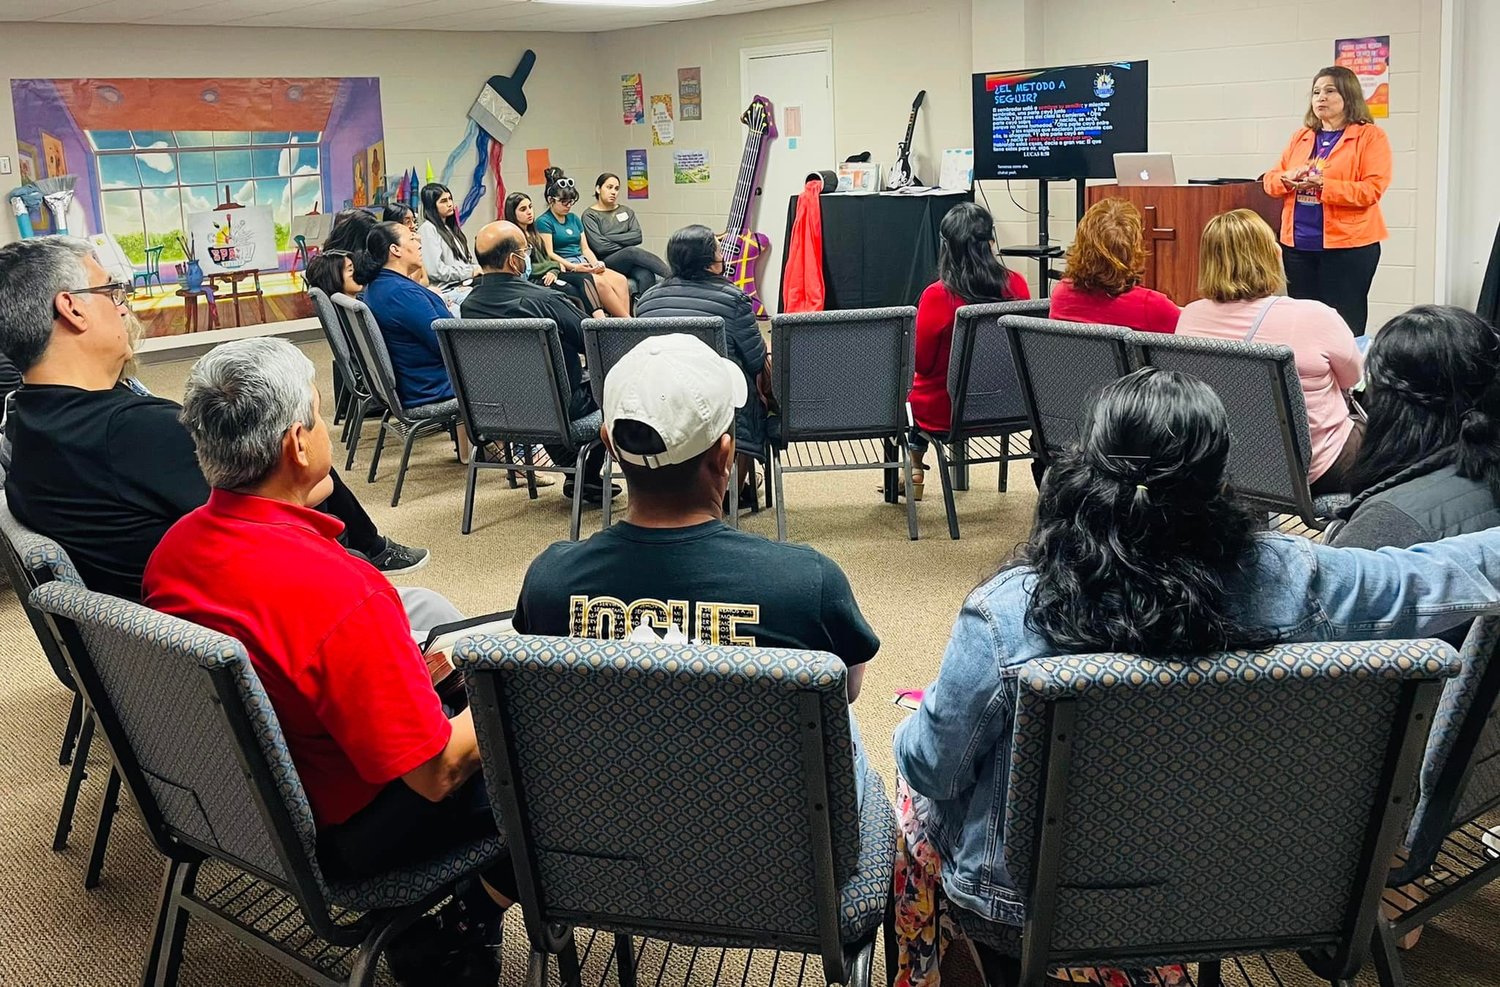 Rossy Rivera leads a class at a Spanish-language VBS training session in Kennesaw, Ga.